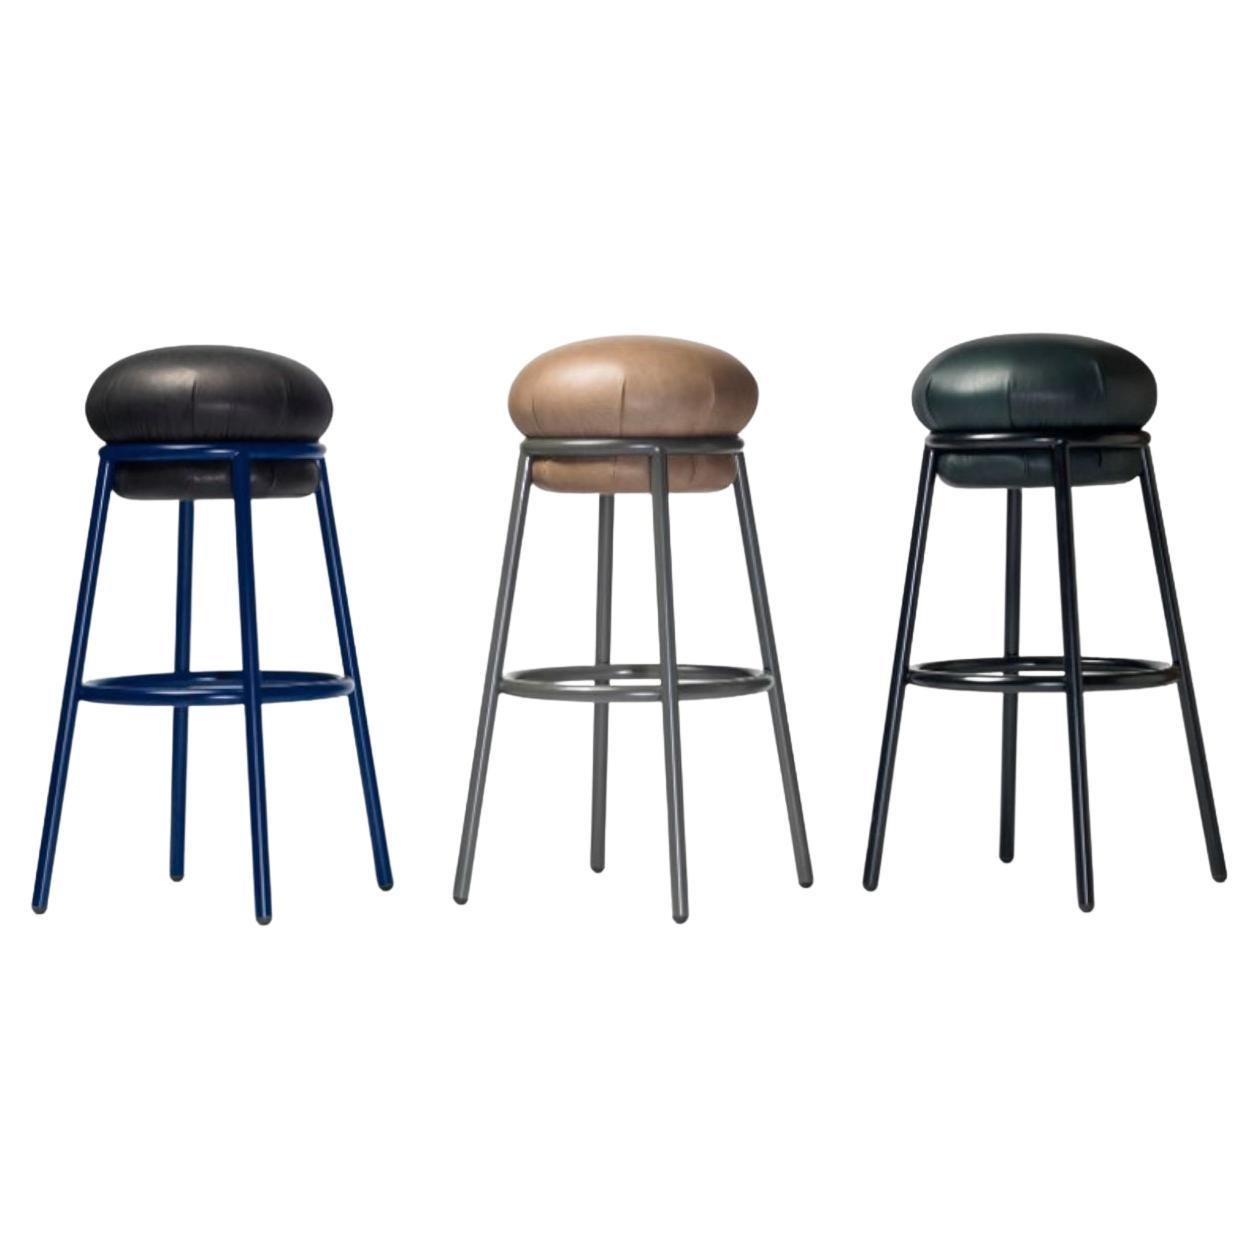 Set of 3 Grasso Stool by Stephen Burks For Sale